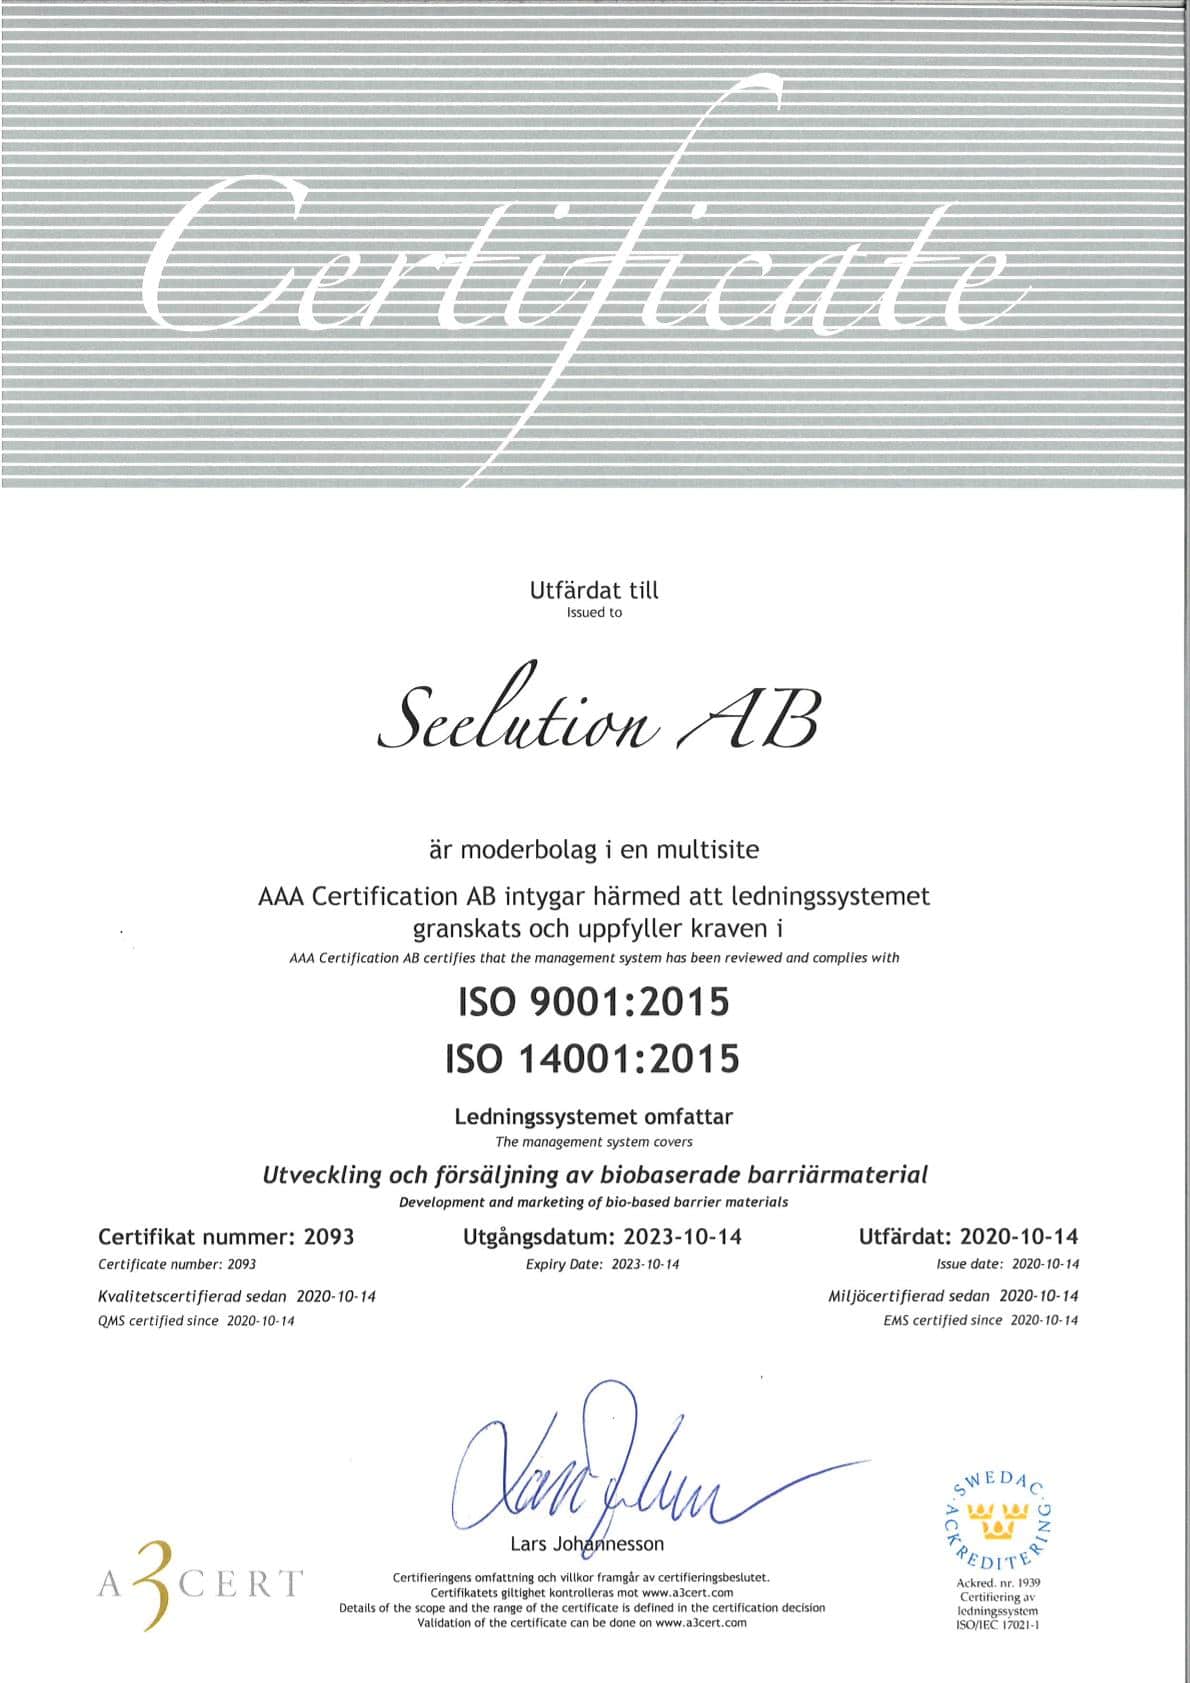 Seelution AB ISO Certificate